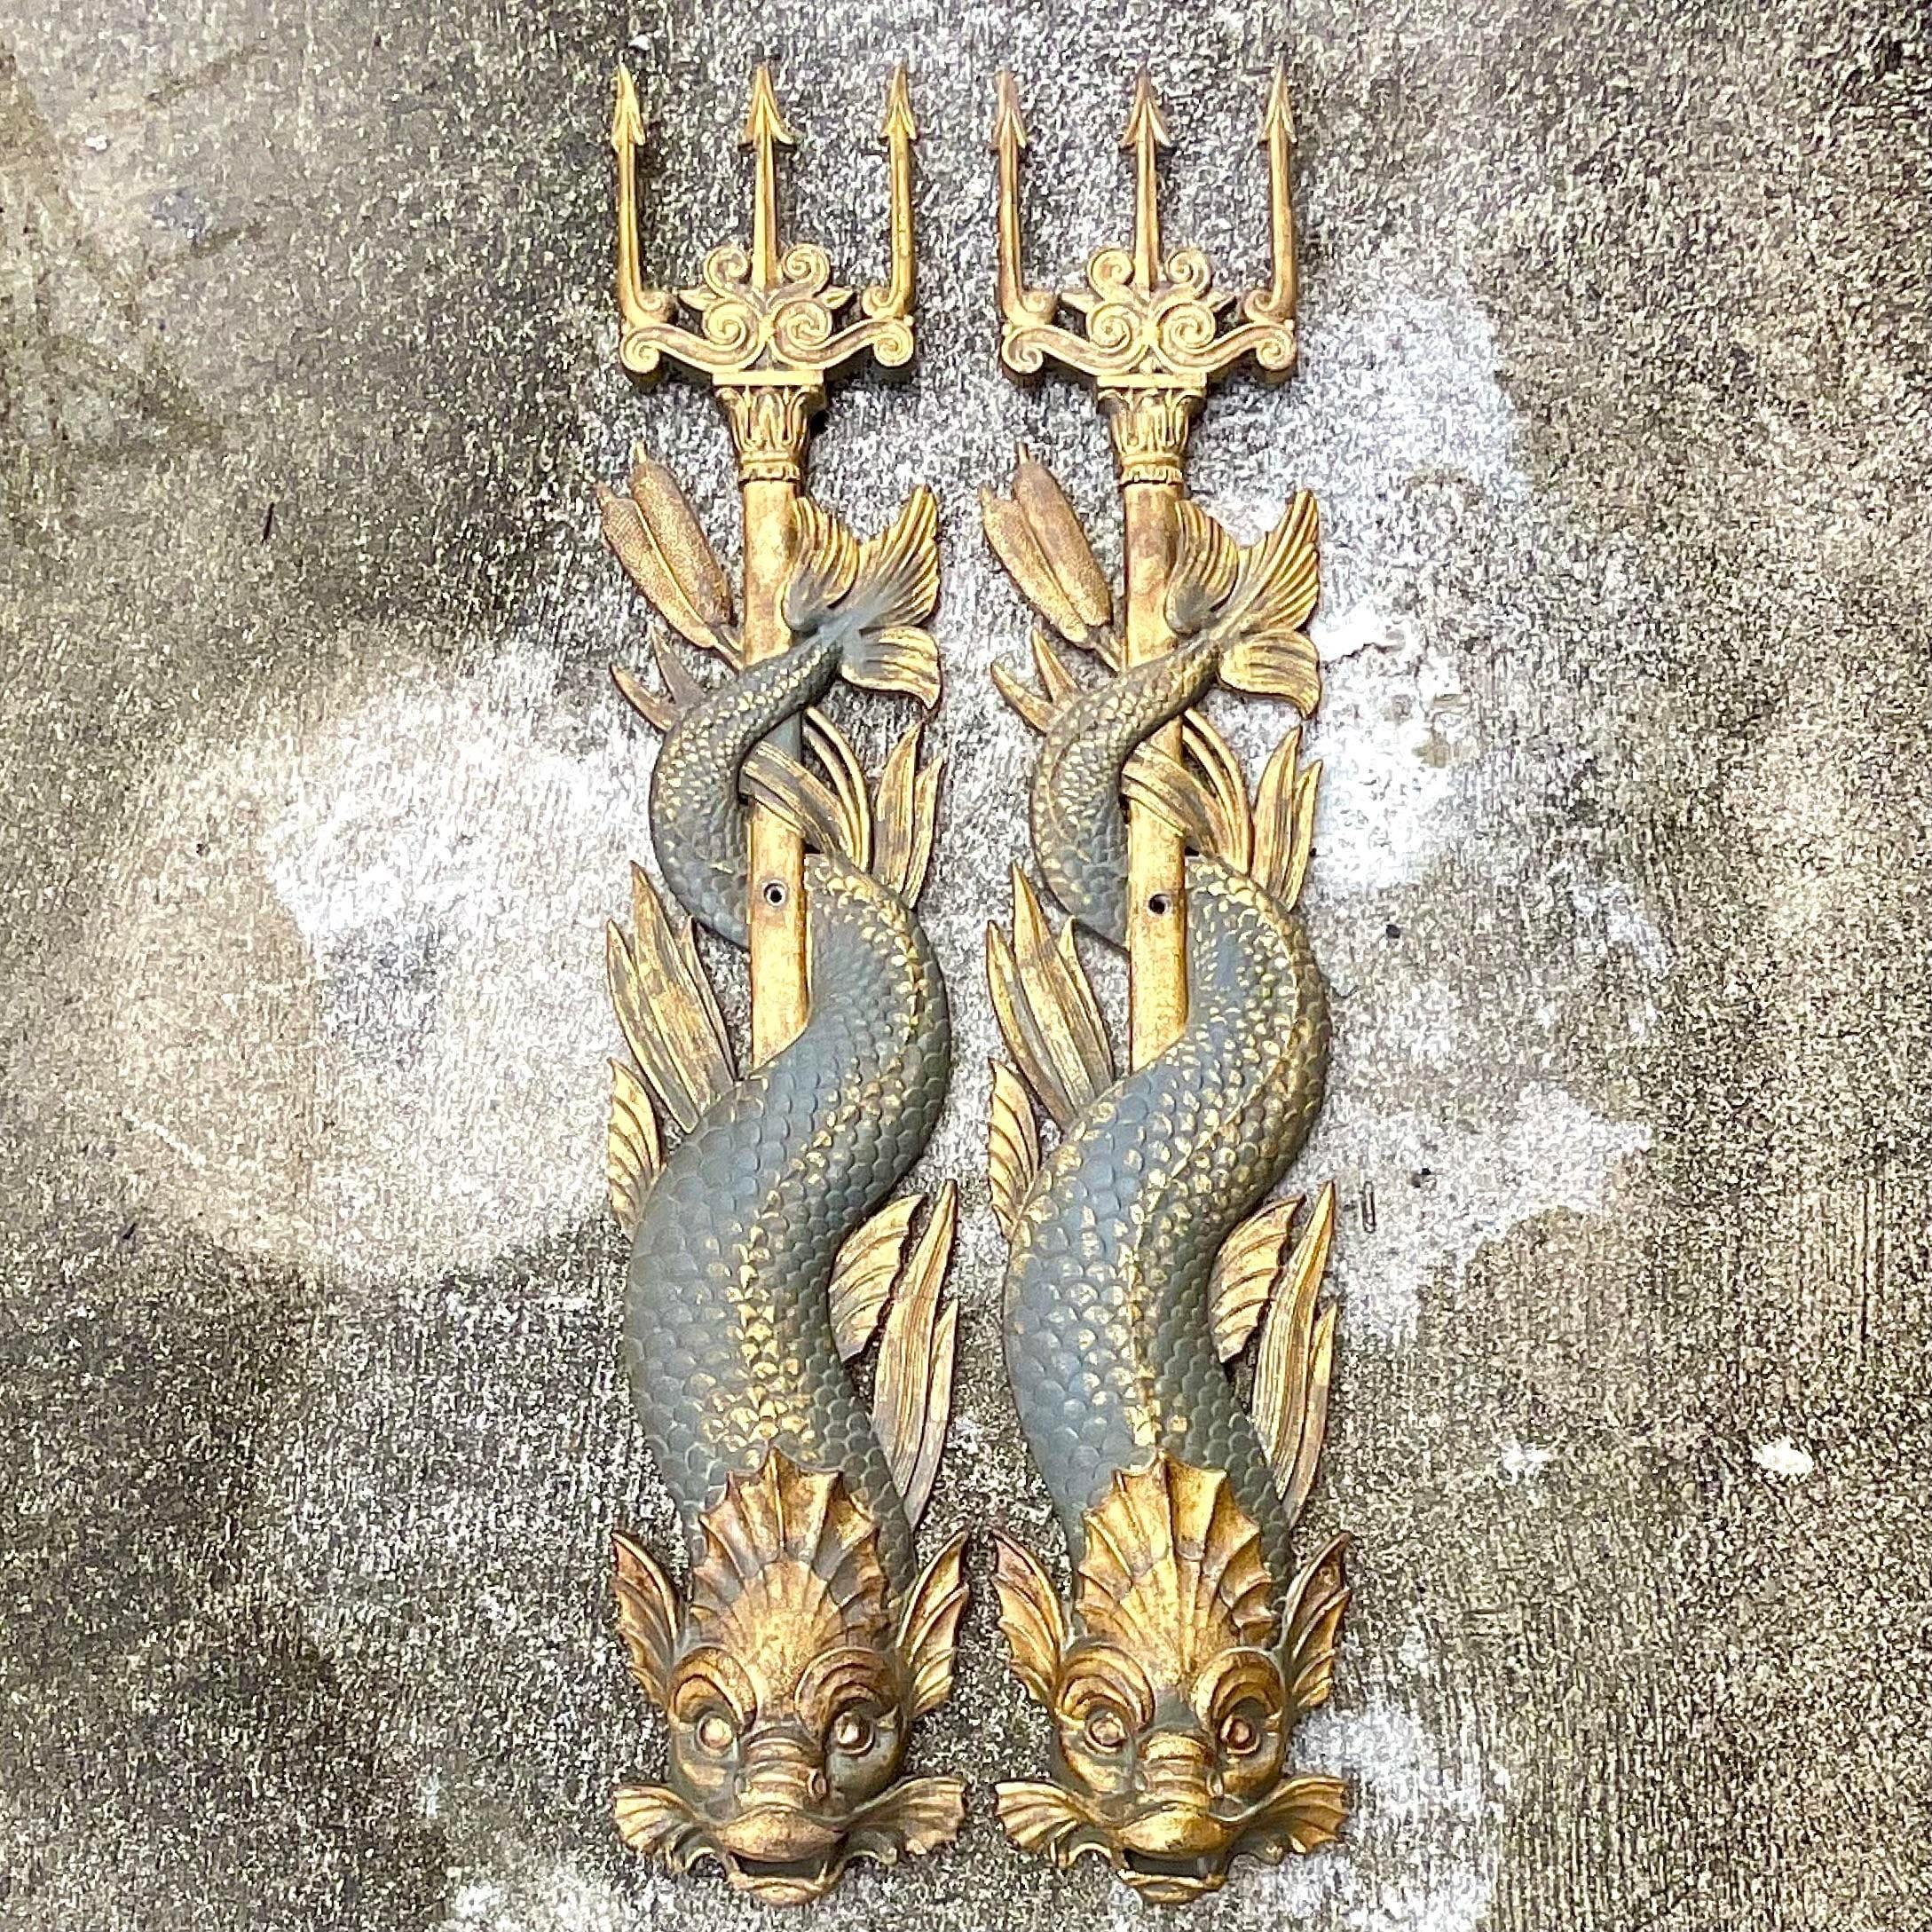 Vintage Boho Painted Iron Serpent Wall Spouts - a Pair 7